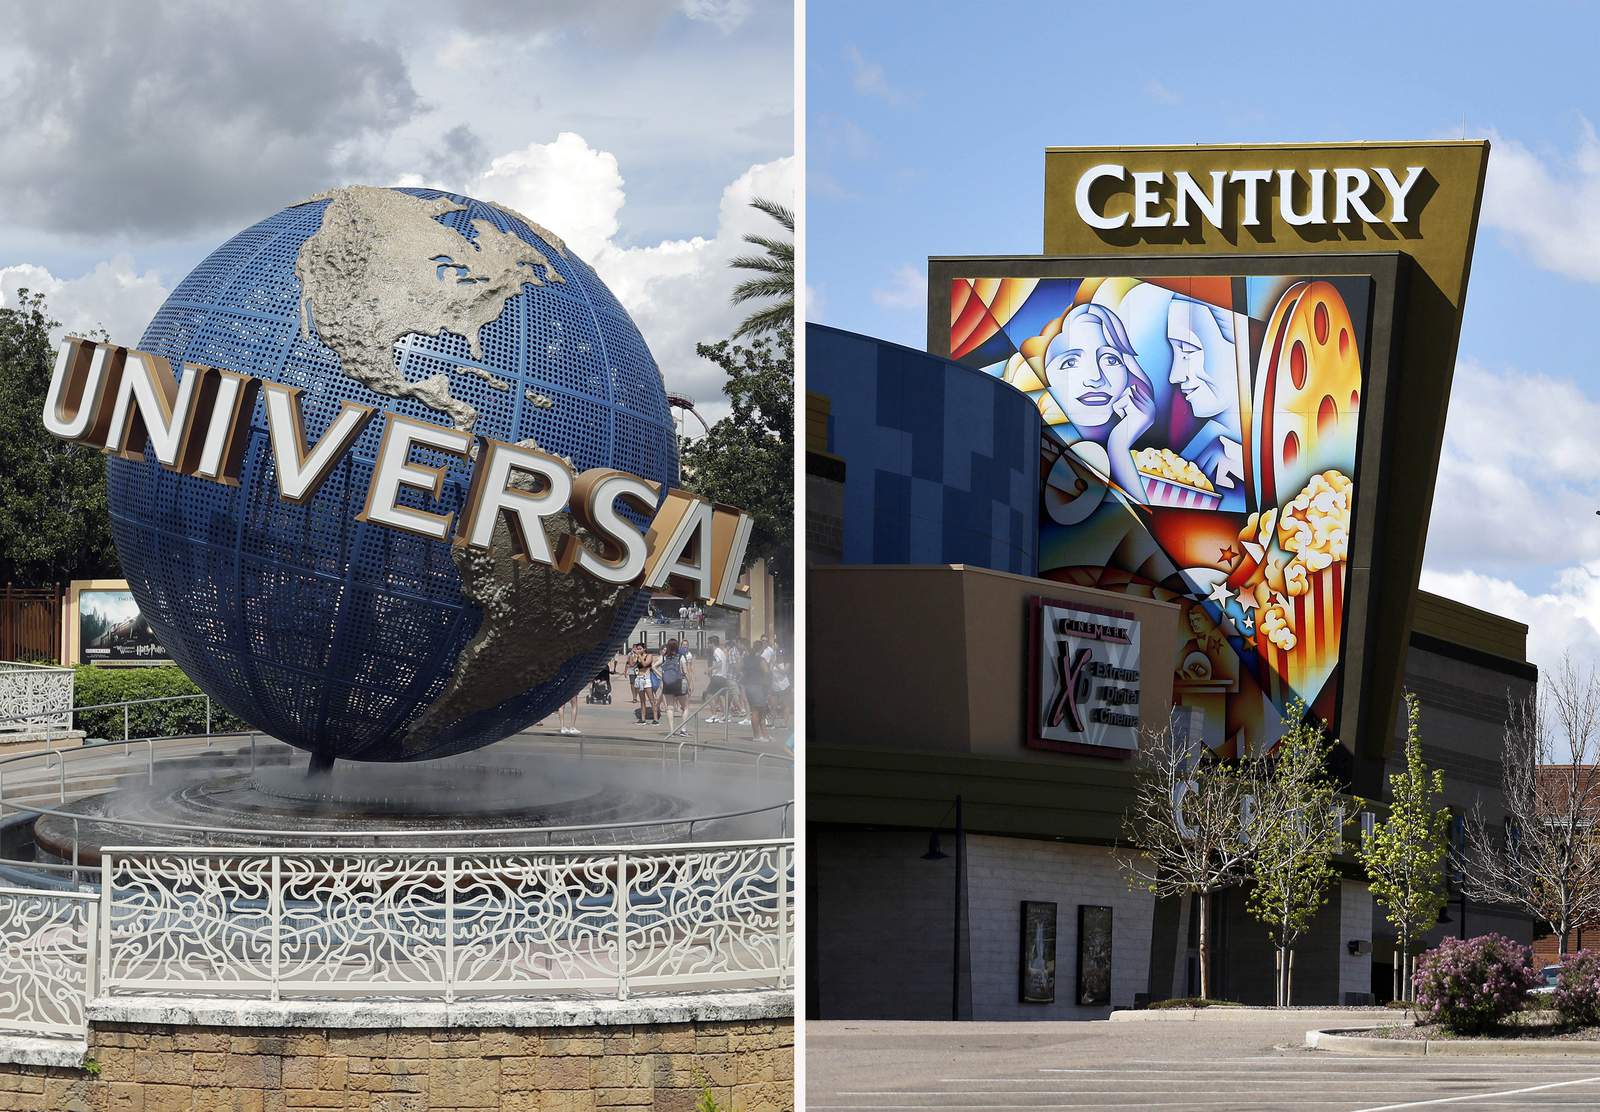 Universal and Cinemark agree to shorten theatrical window